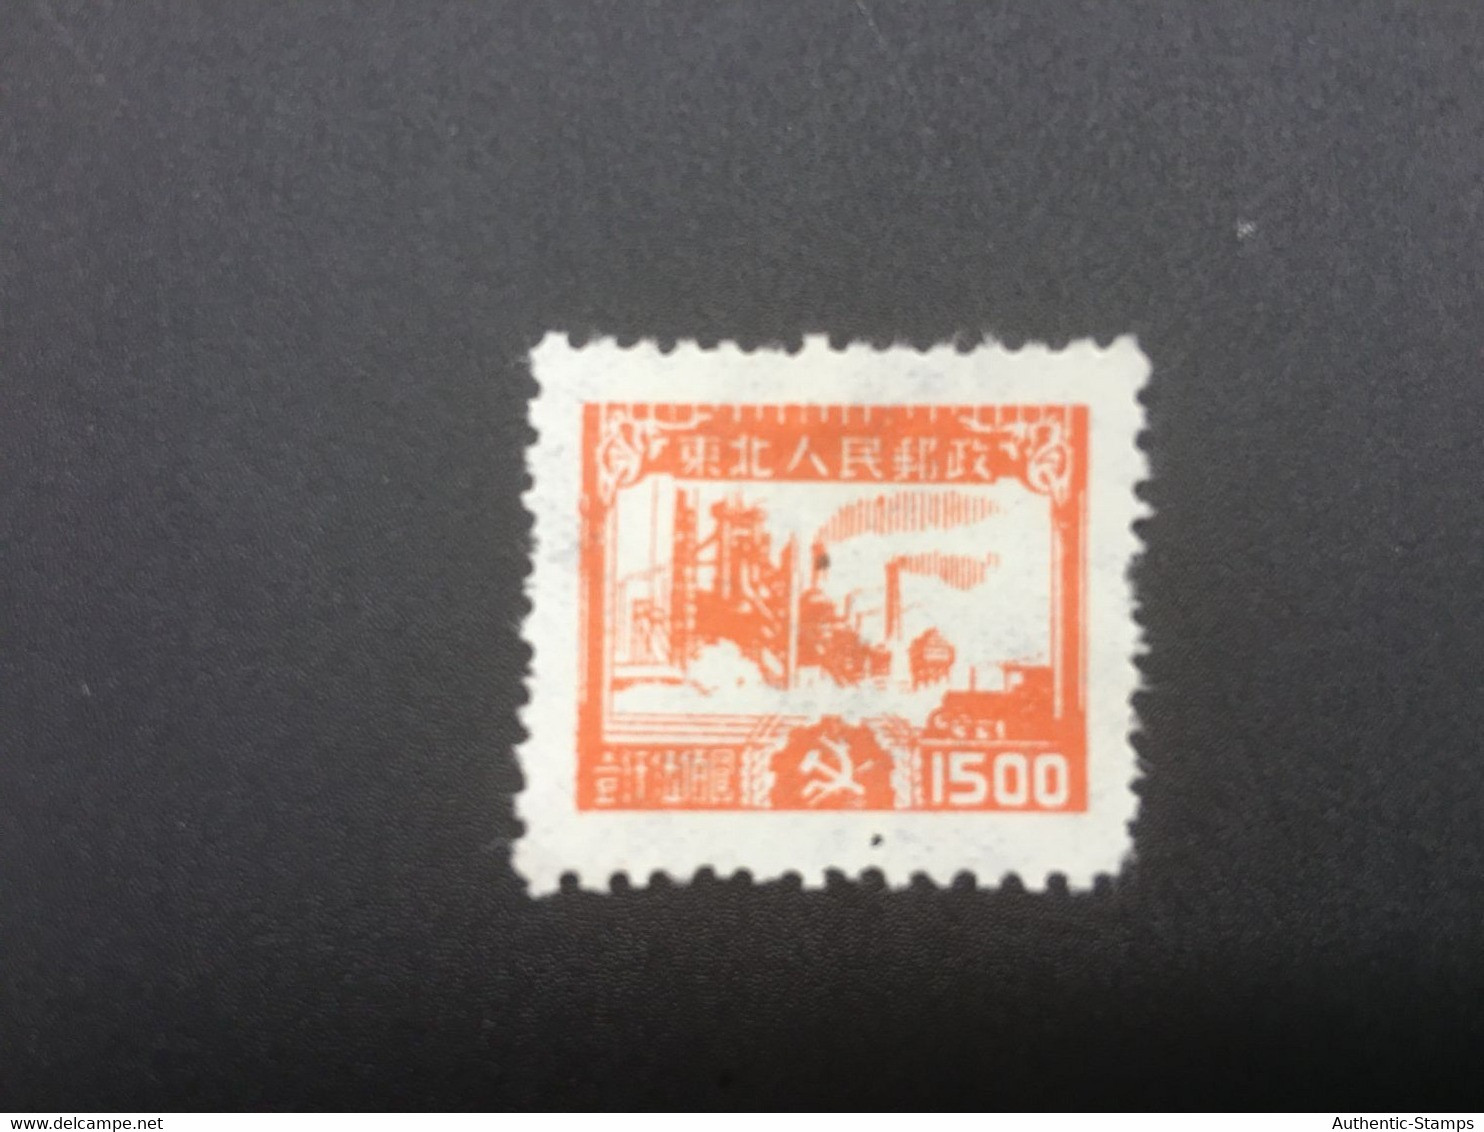 CHINA STAMP, UnUSED, TIMBRO, STEMPEL, CINA, CHINE, LIST 6172 - Chine Du Nord-Est 1946-48